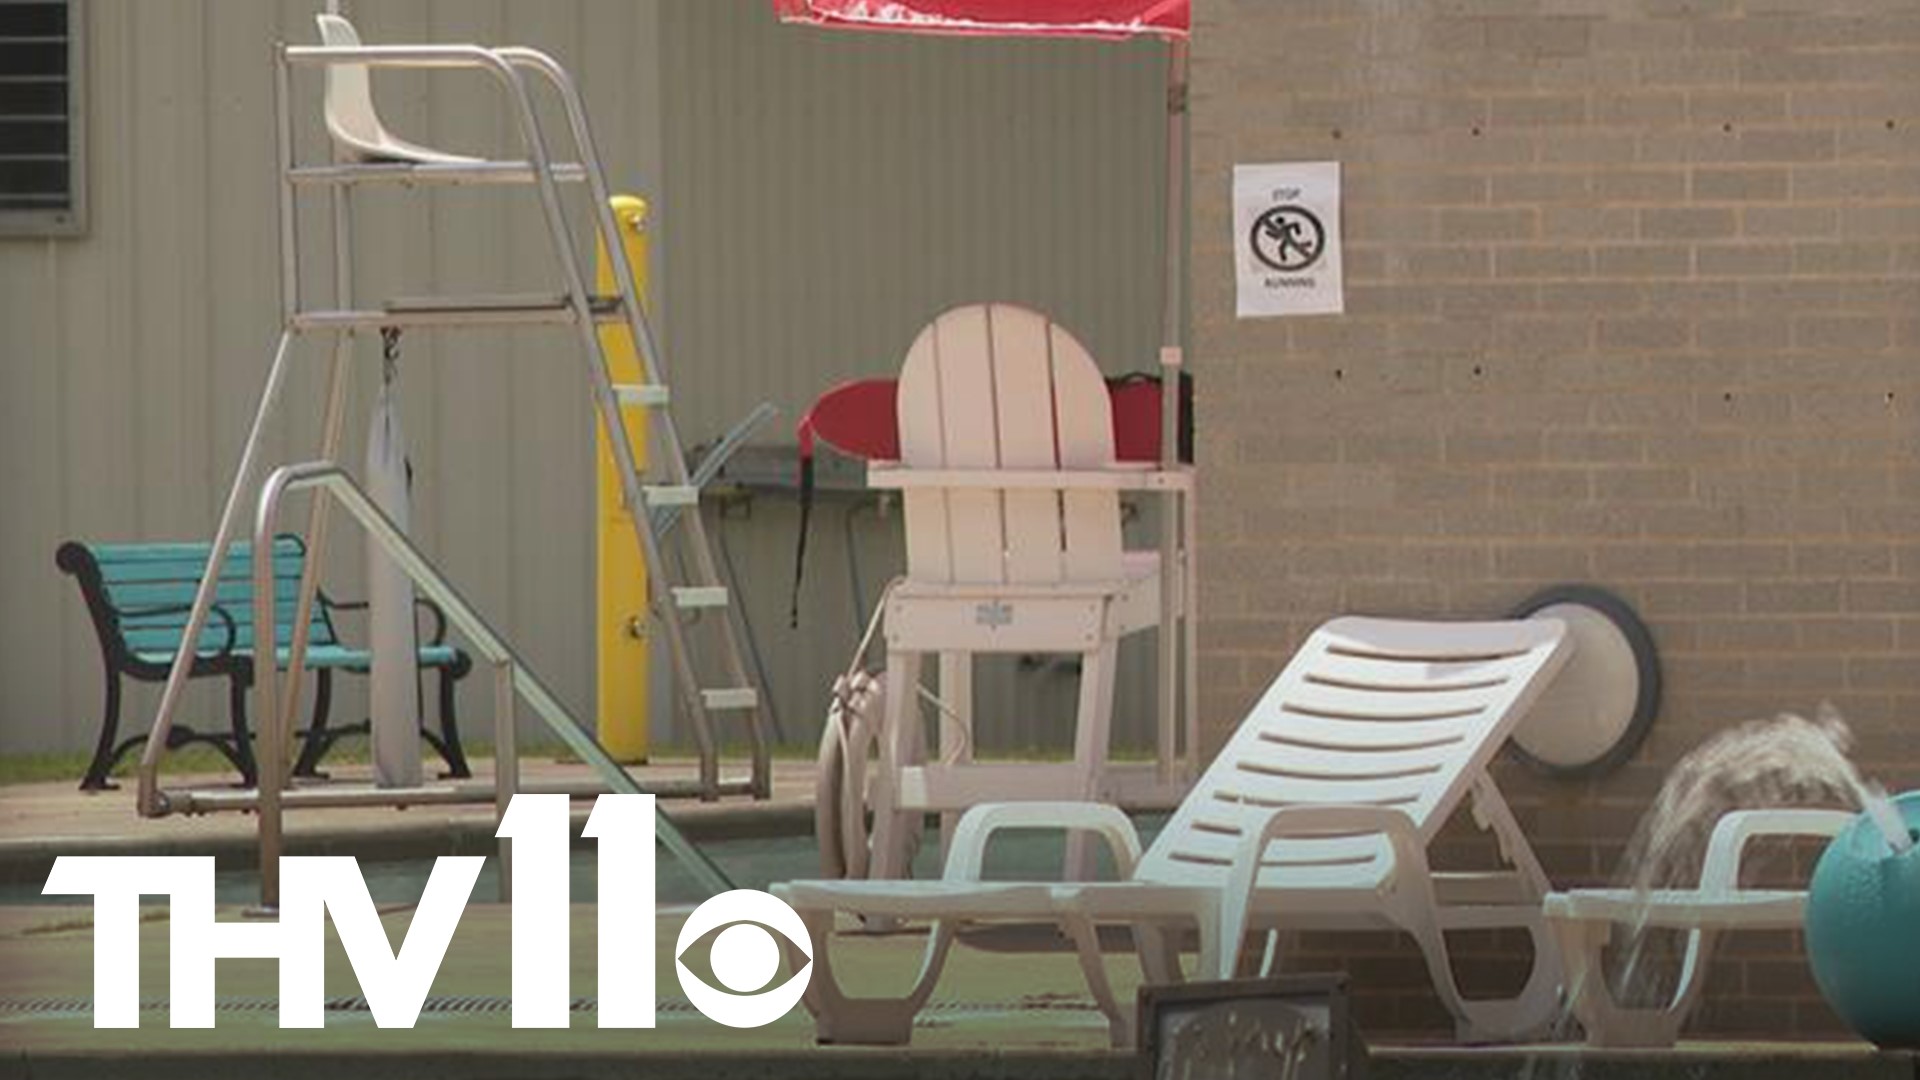 The City of Little Rock is closing the Southwest Community Center until June 3 after a pool incident involving an 18-year-old man.